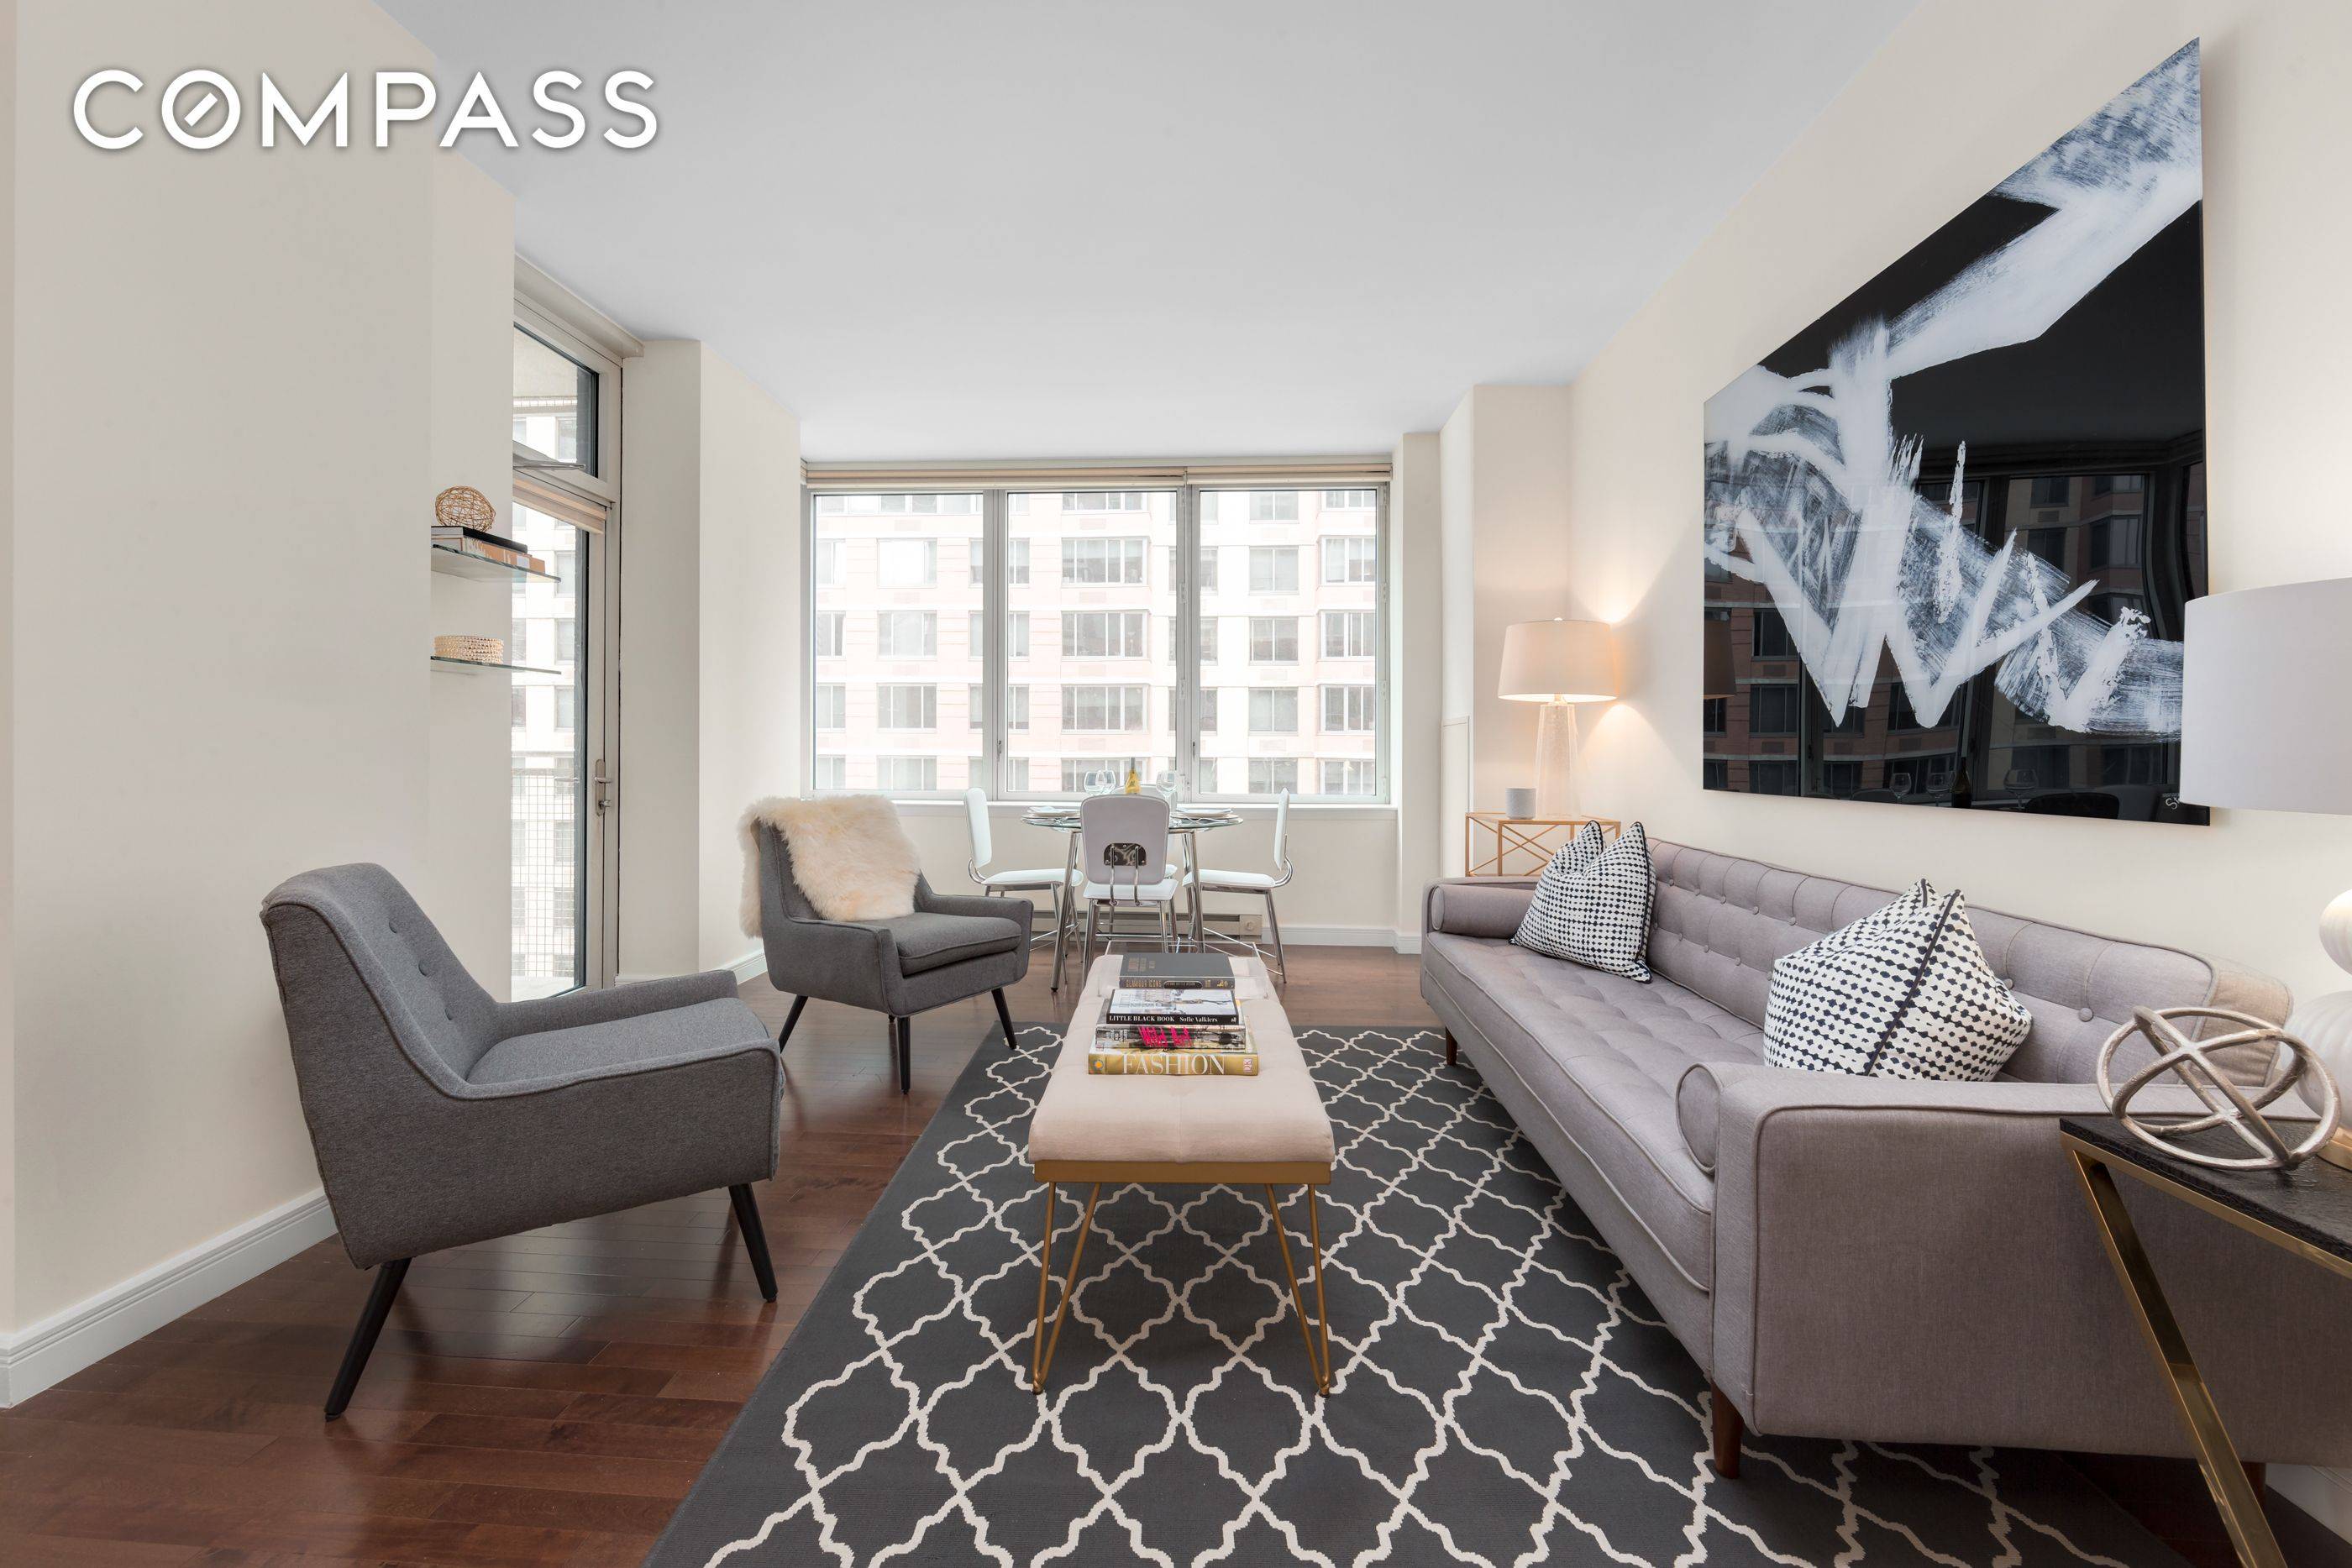 This stunning 2 bedroom apartment features hardwood floors, 3 Zone Central Heat AC, Washer Dryer, a large open chef s kitchen with etched glass cabinetry, crystalline countertops, stainless steel appliances, ...